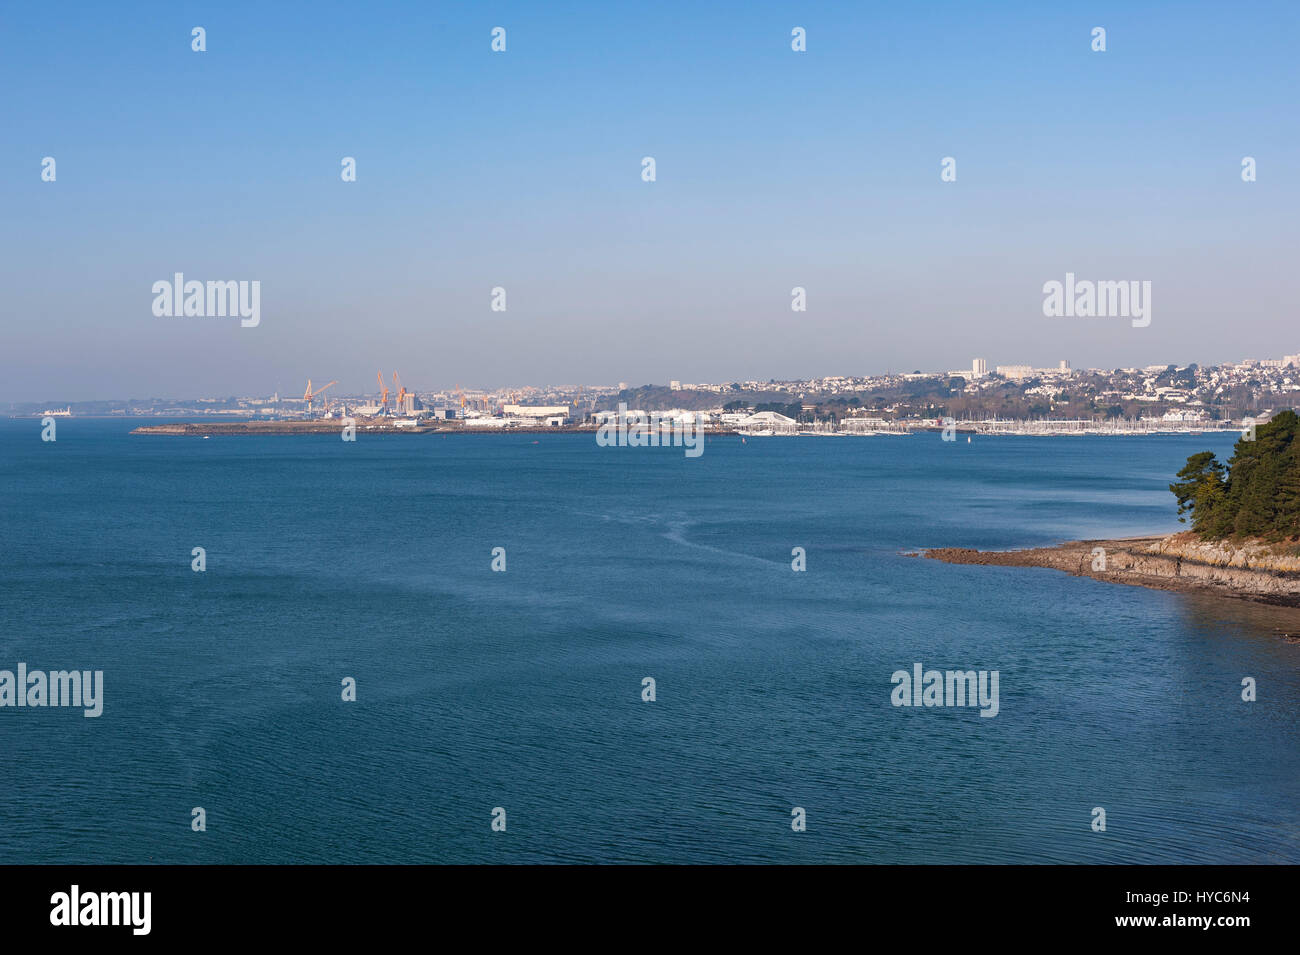 Panoramic view .Mouth of the river Elorn, the roadstead of Brest and the port facilities of Brest seen from the Albert Loupe bridge. Brest, Brittany, Stock Photo